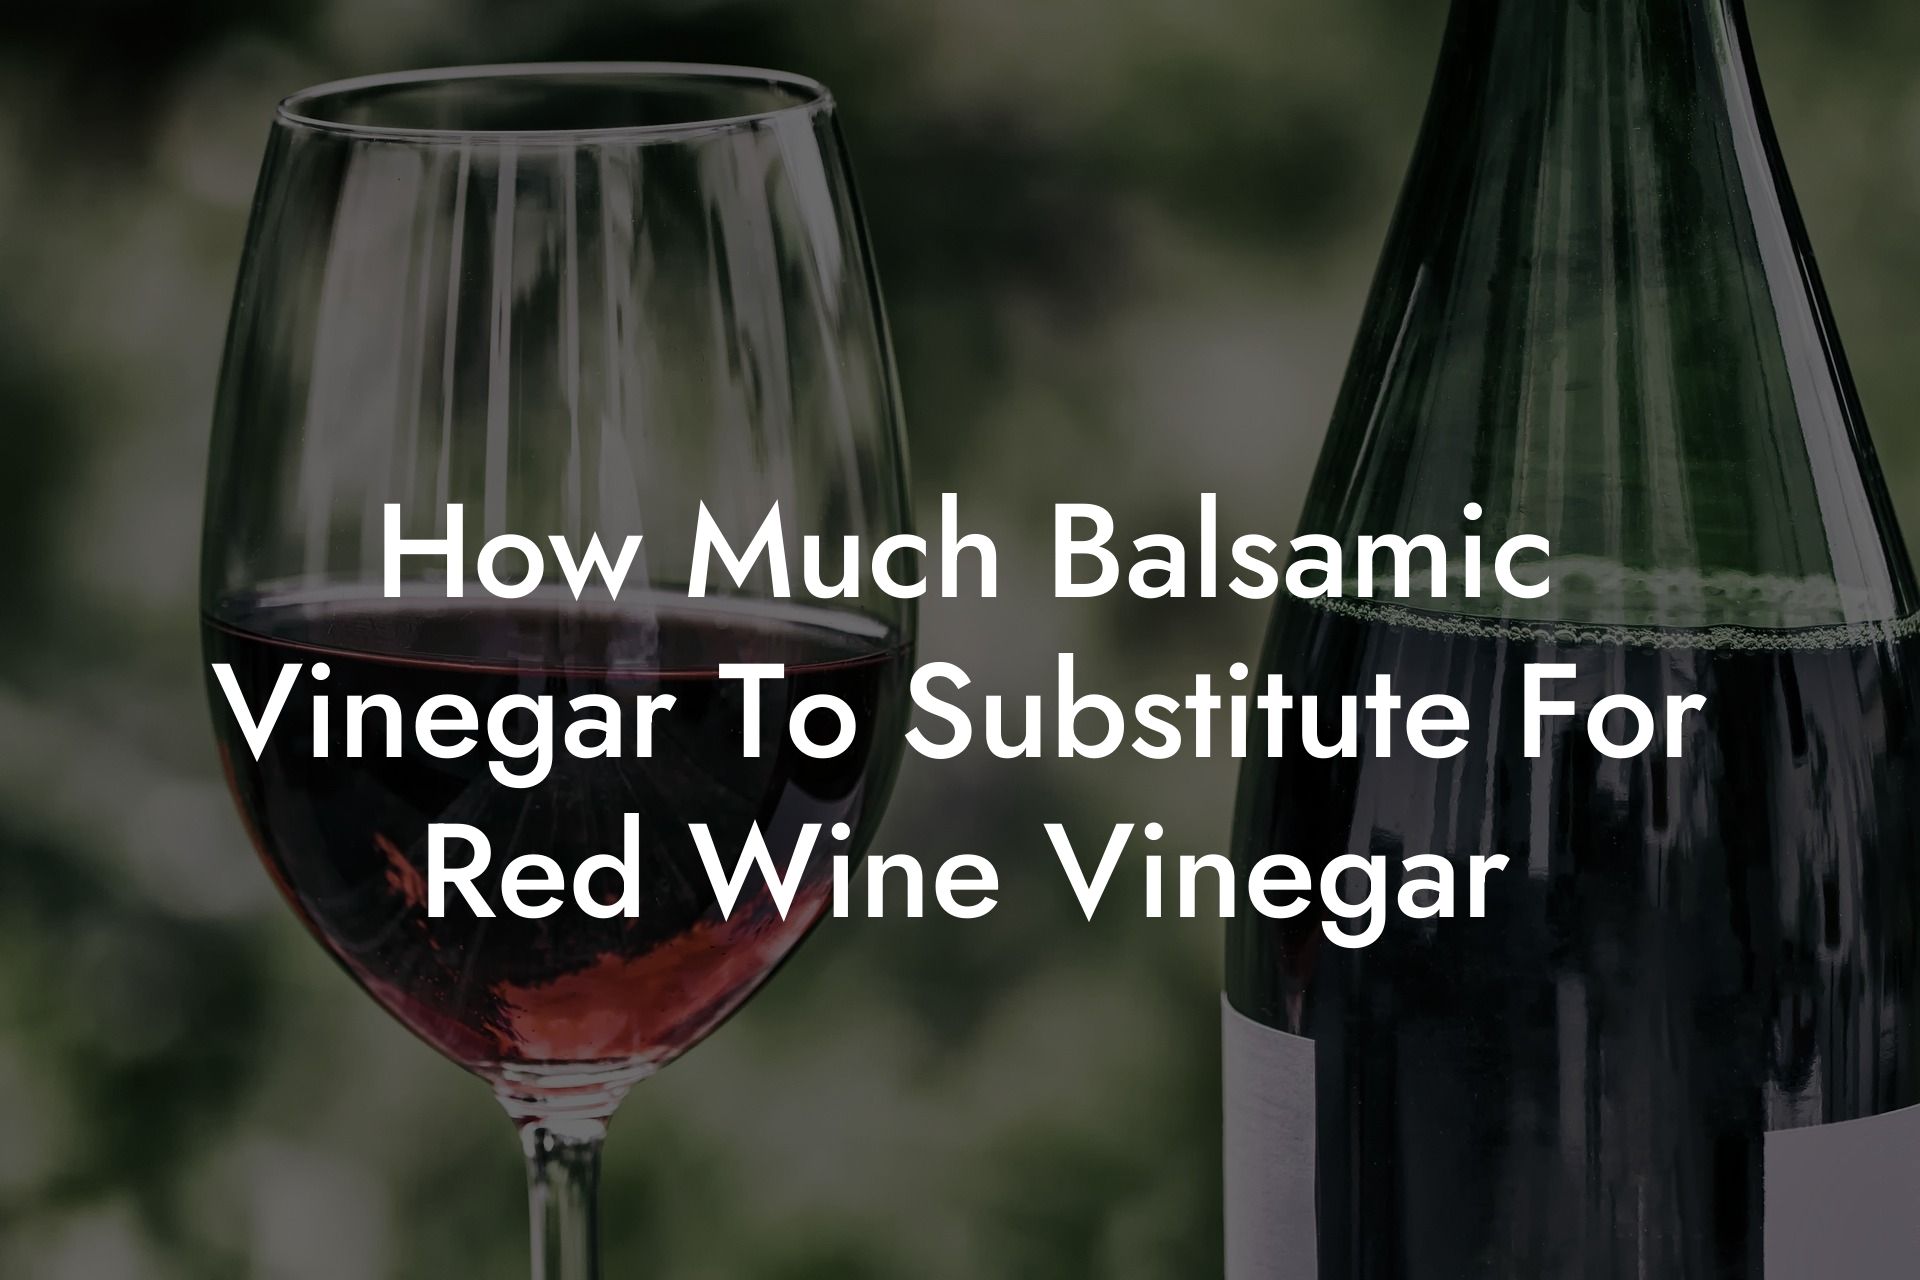 How Much Balsamic Vinegar To Substitute For Red Wine Vinegar